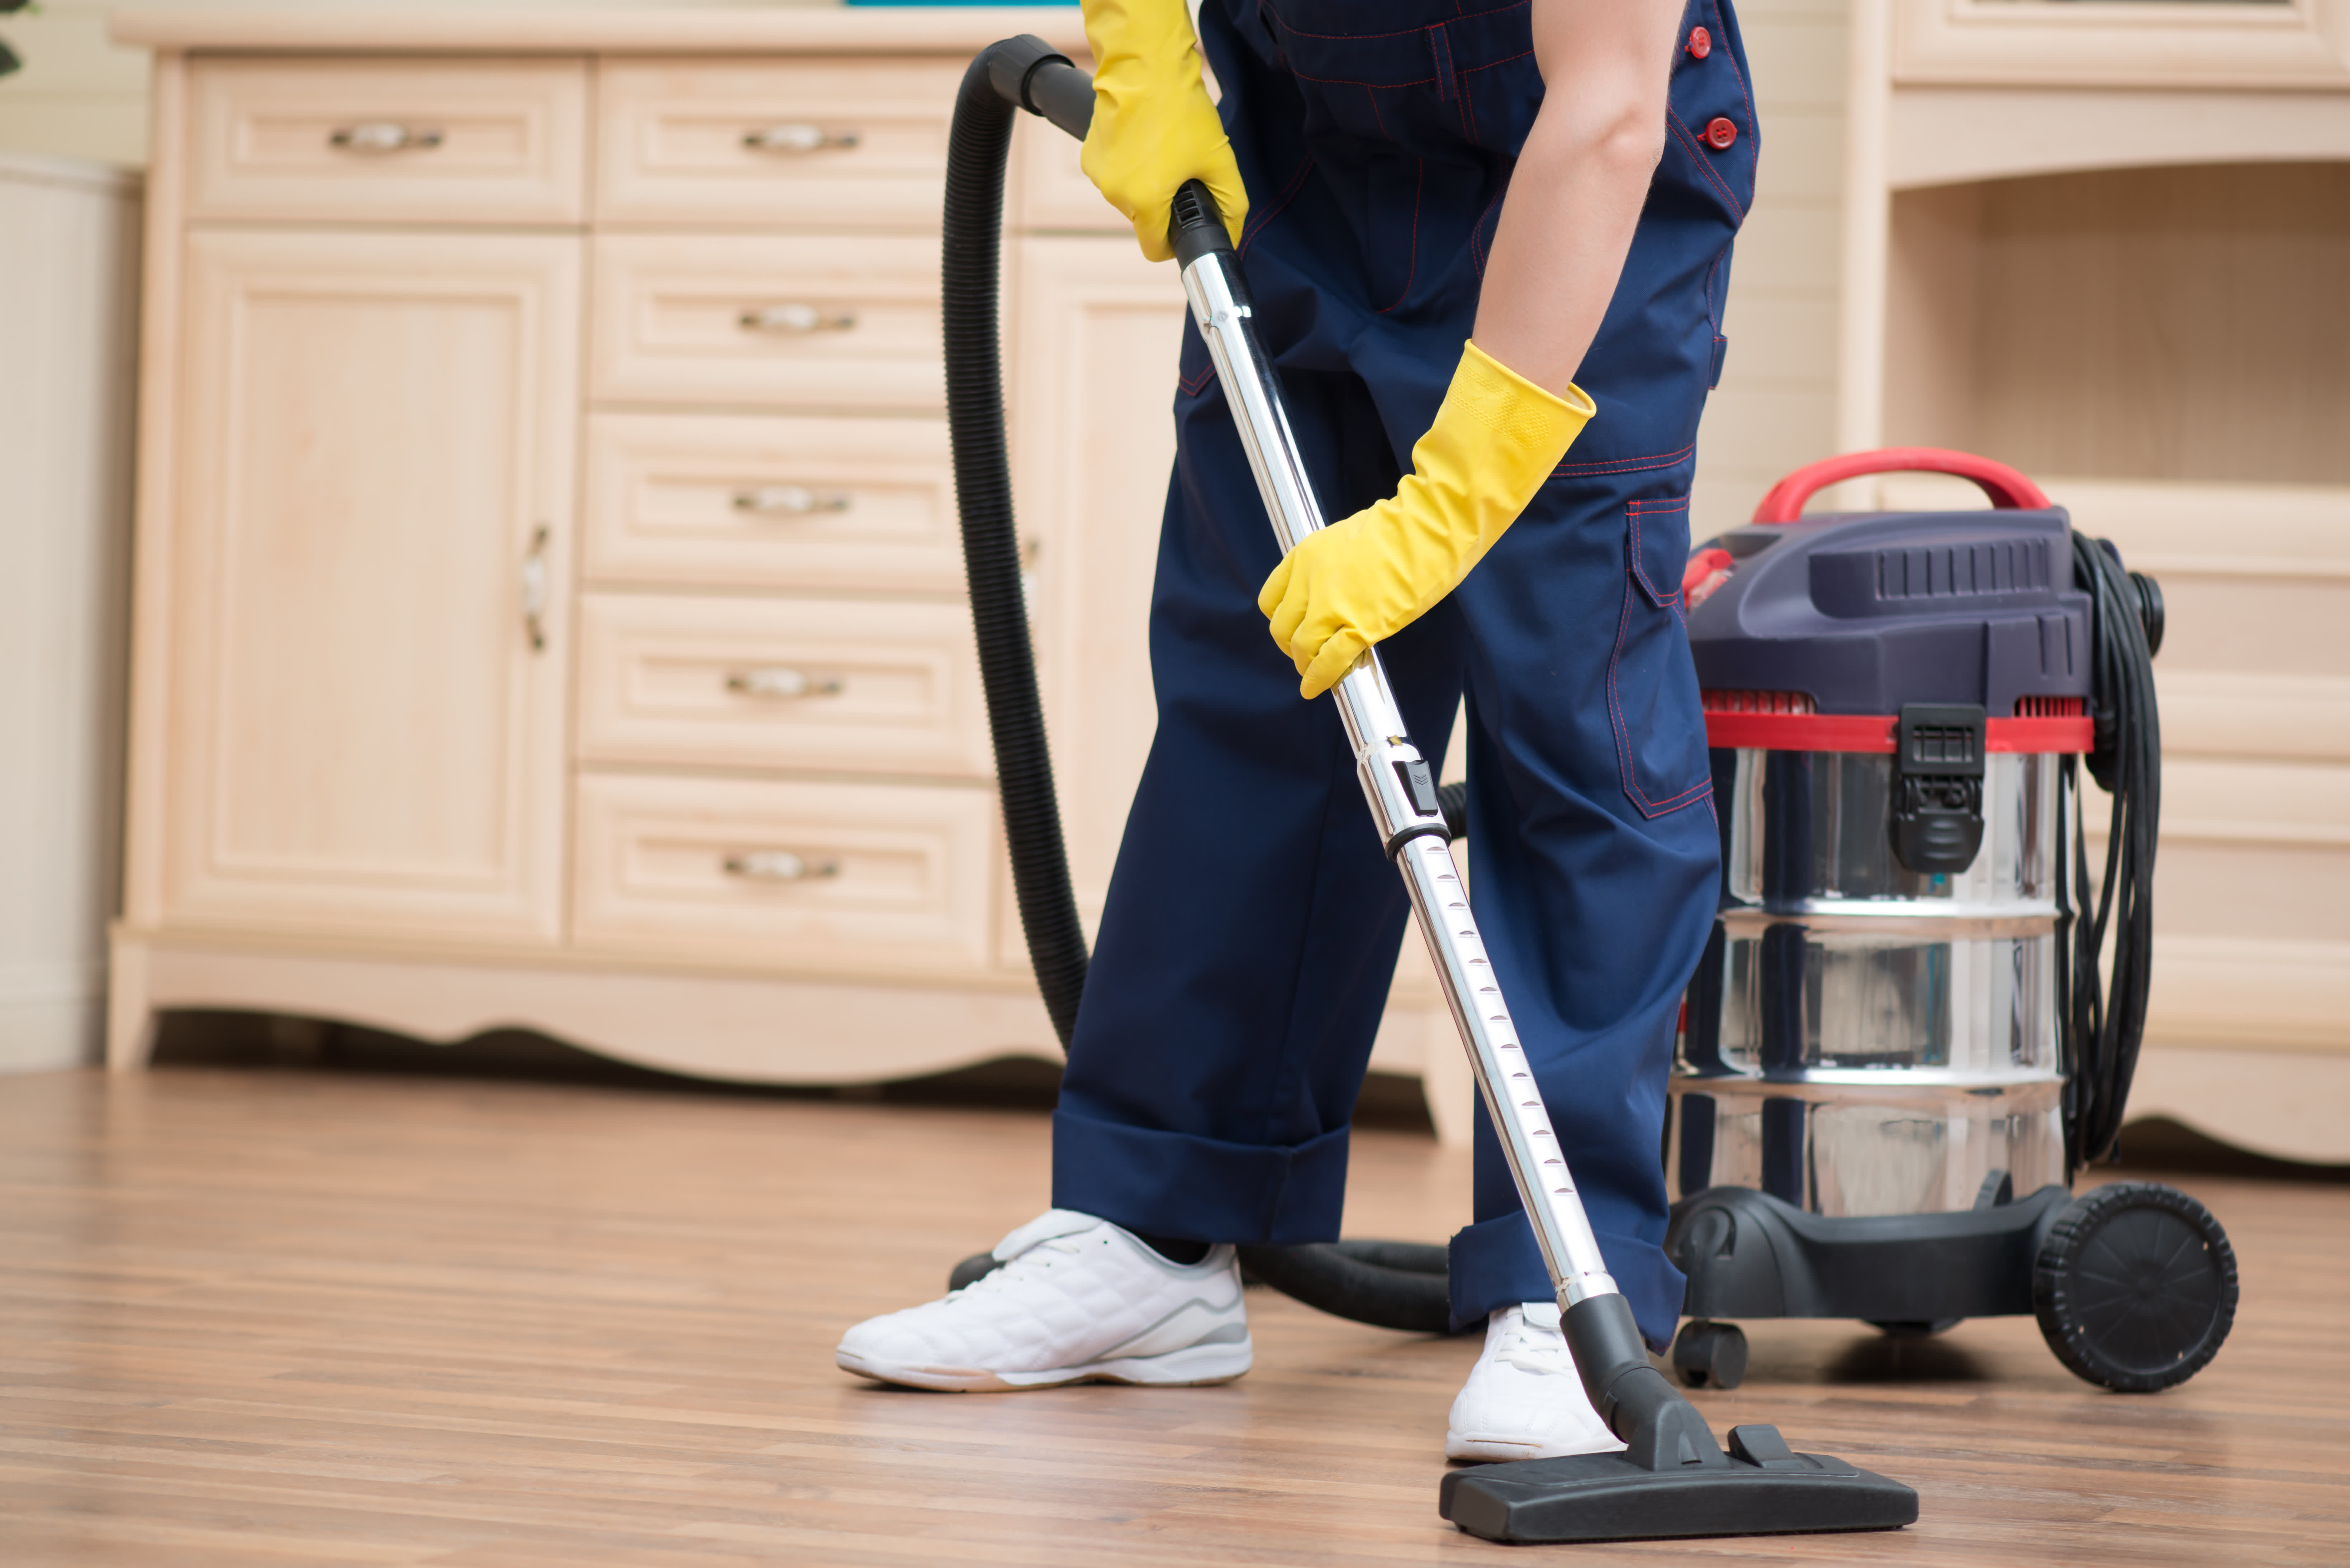 HouseJoyss - Home Cleaning Services | Office Cleaning | Washroom Cleaning | Kitchen Cleaning | Carpet Cleaning | Windows Cleaning | Floor Cleaning | Pest Control Service